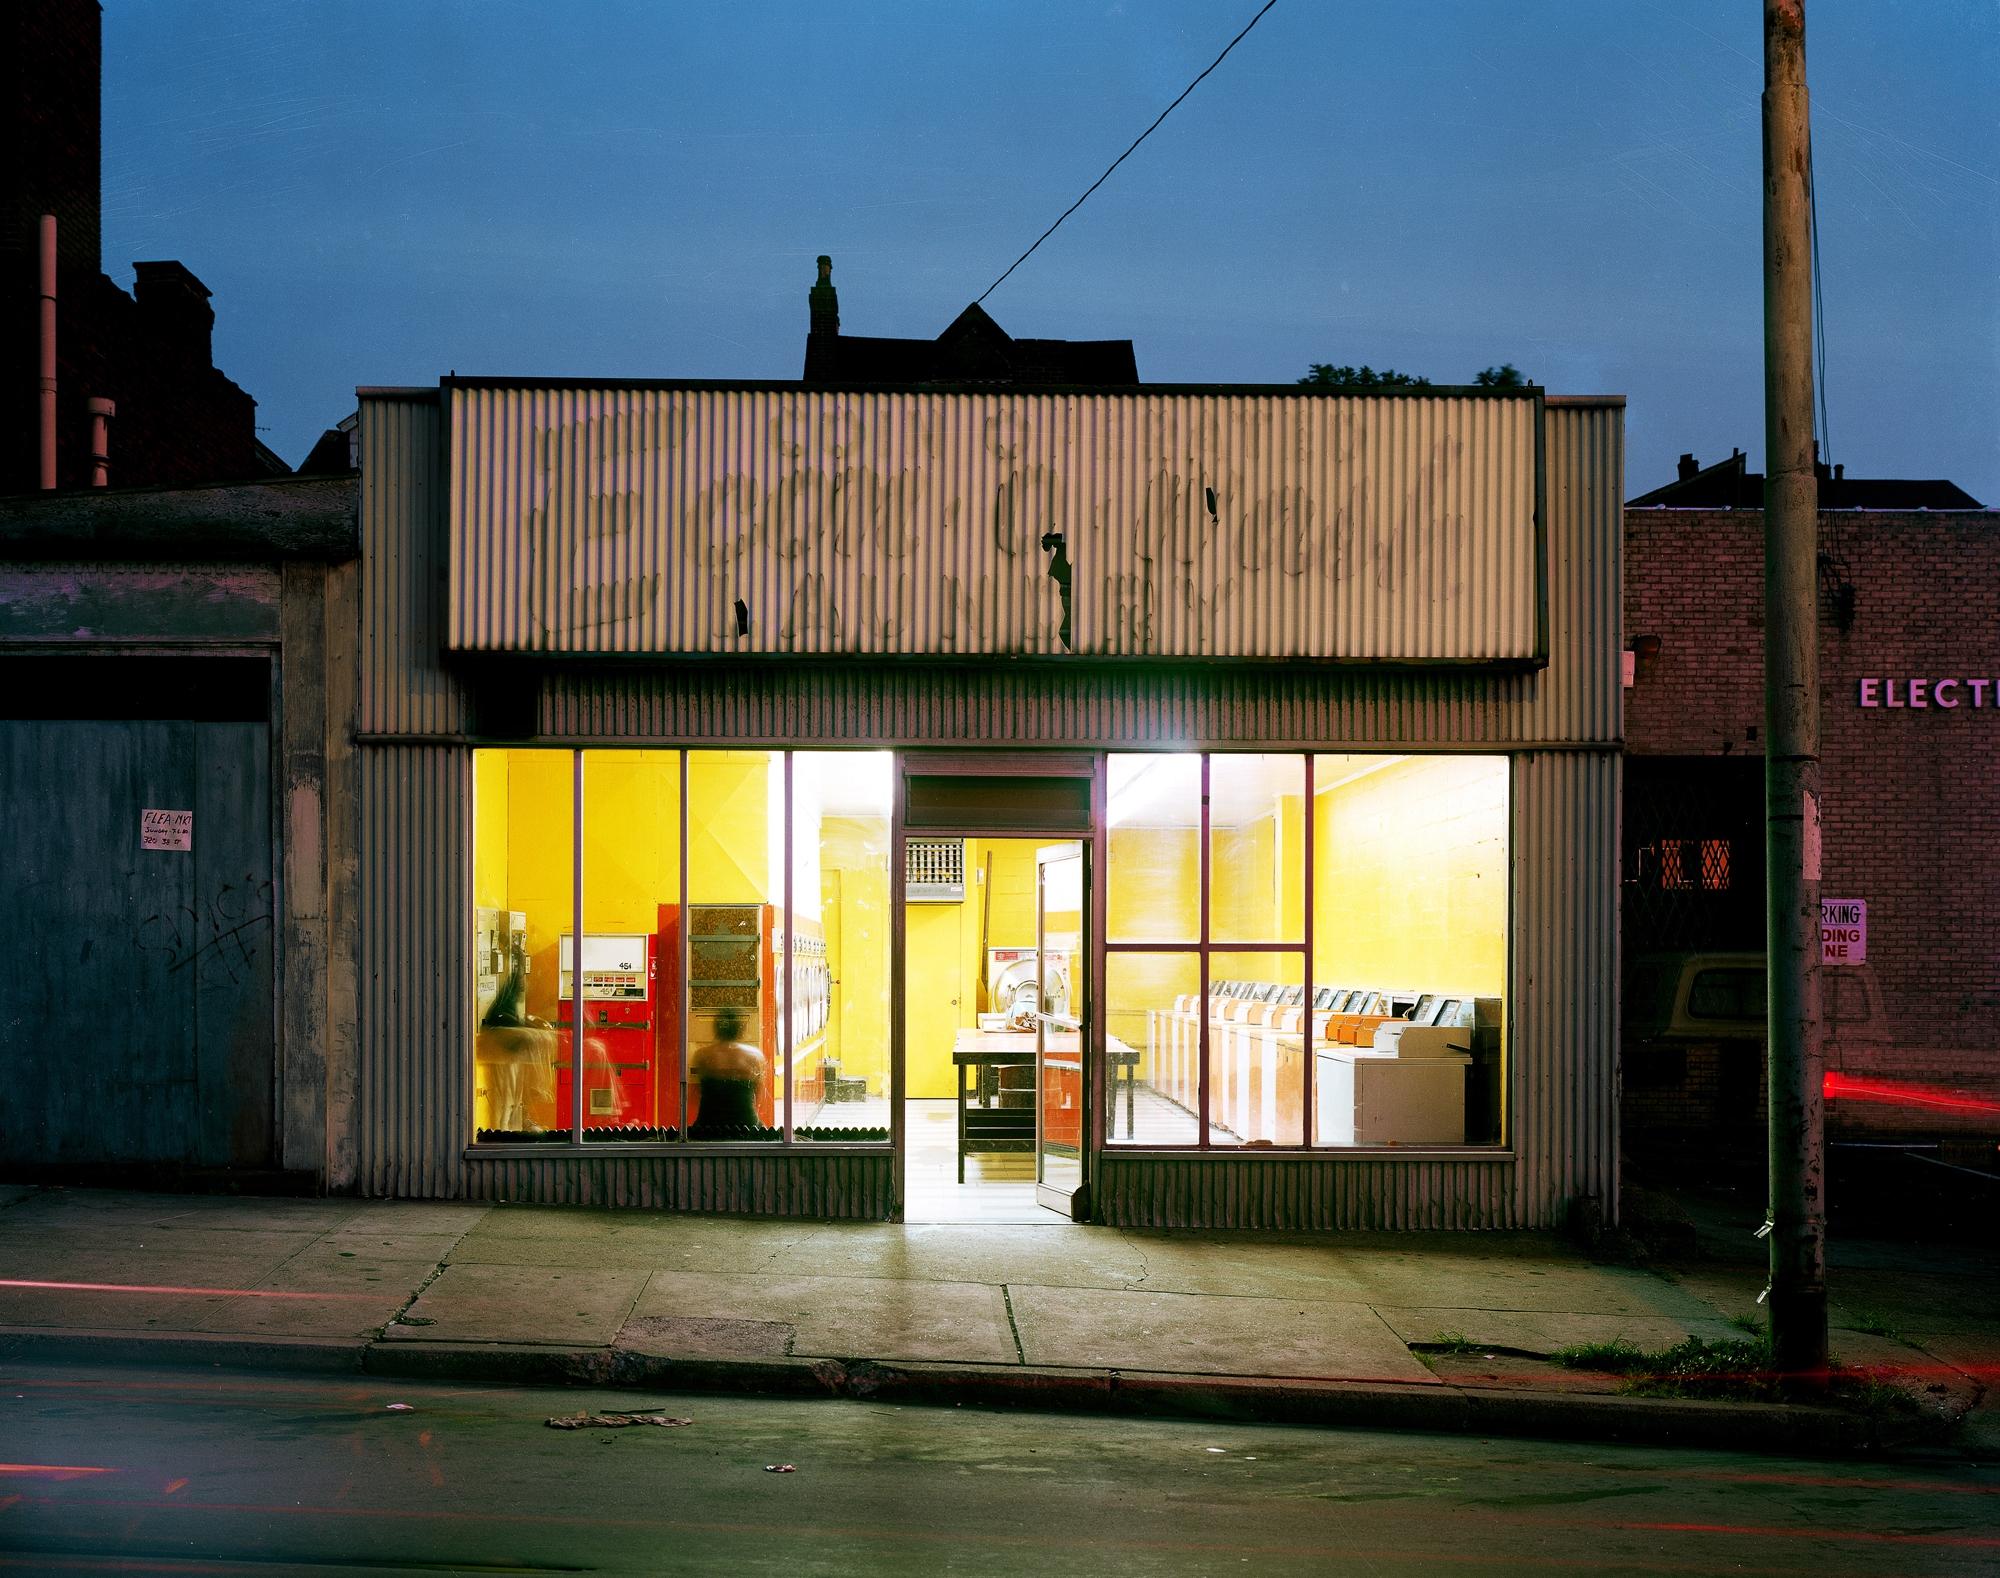 Joel Degrand Color Photograph - Econ-O-Wash, Pittsburgh, PA, Photograph, Archival Ink Jet